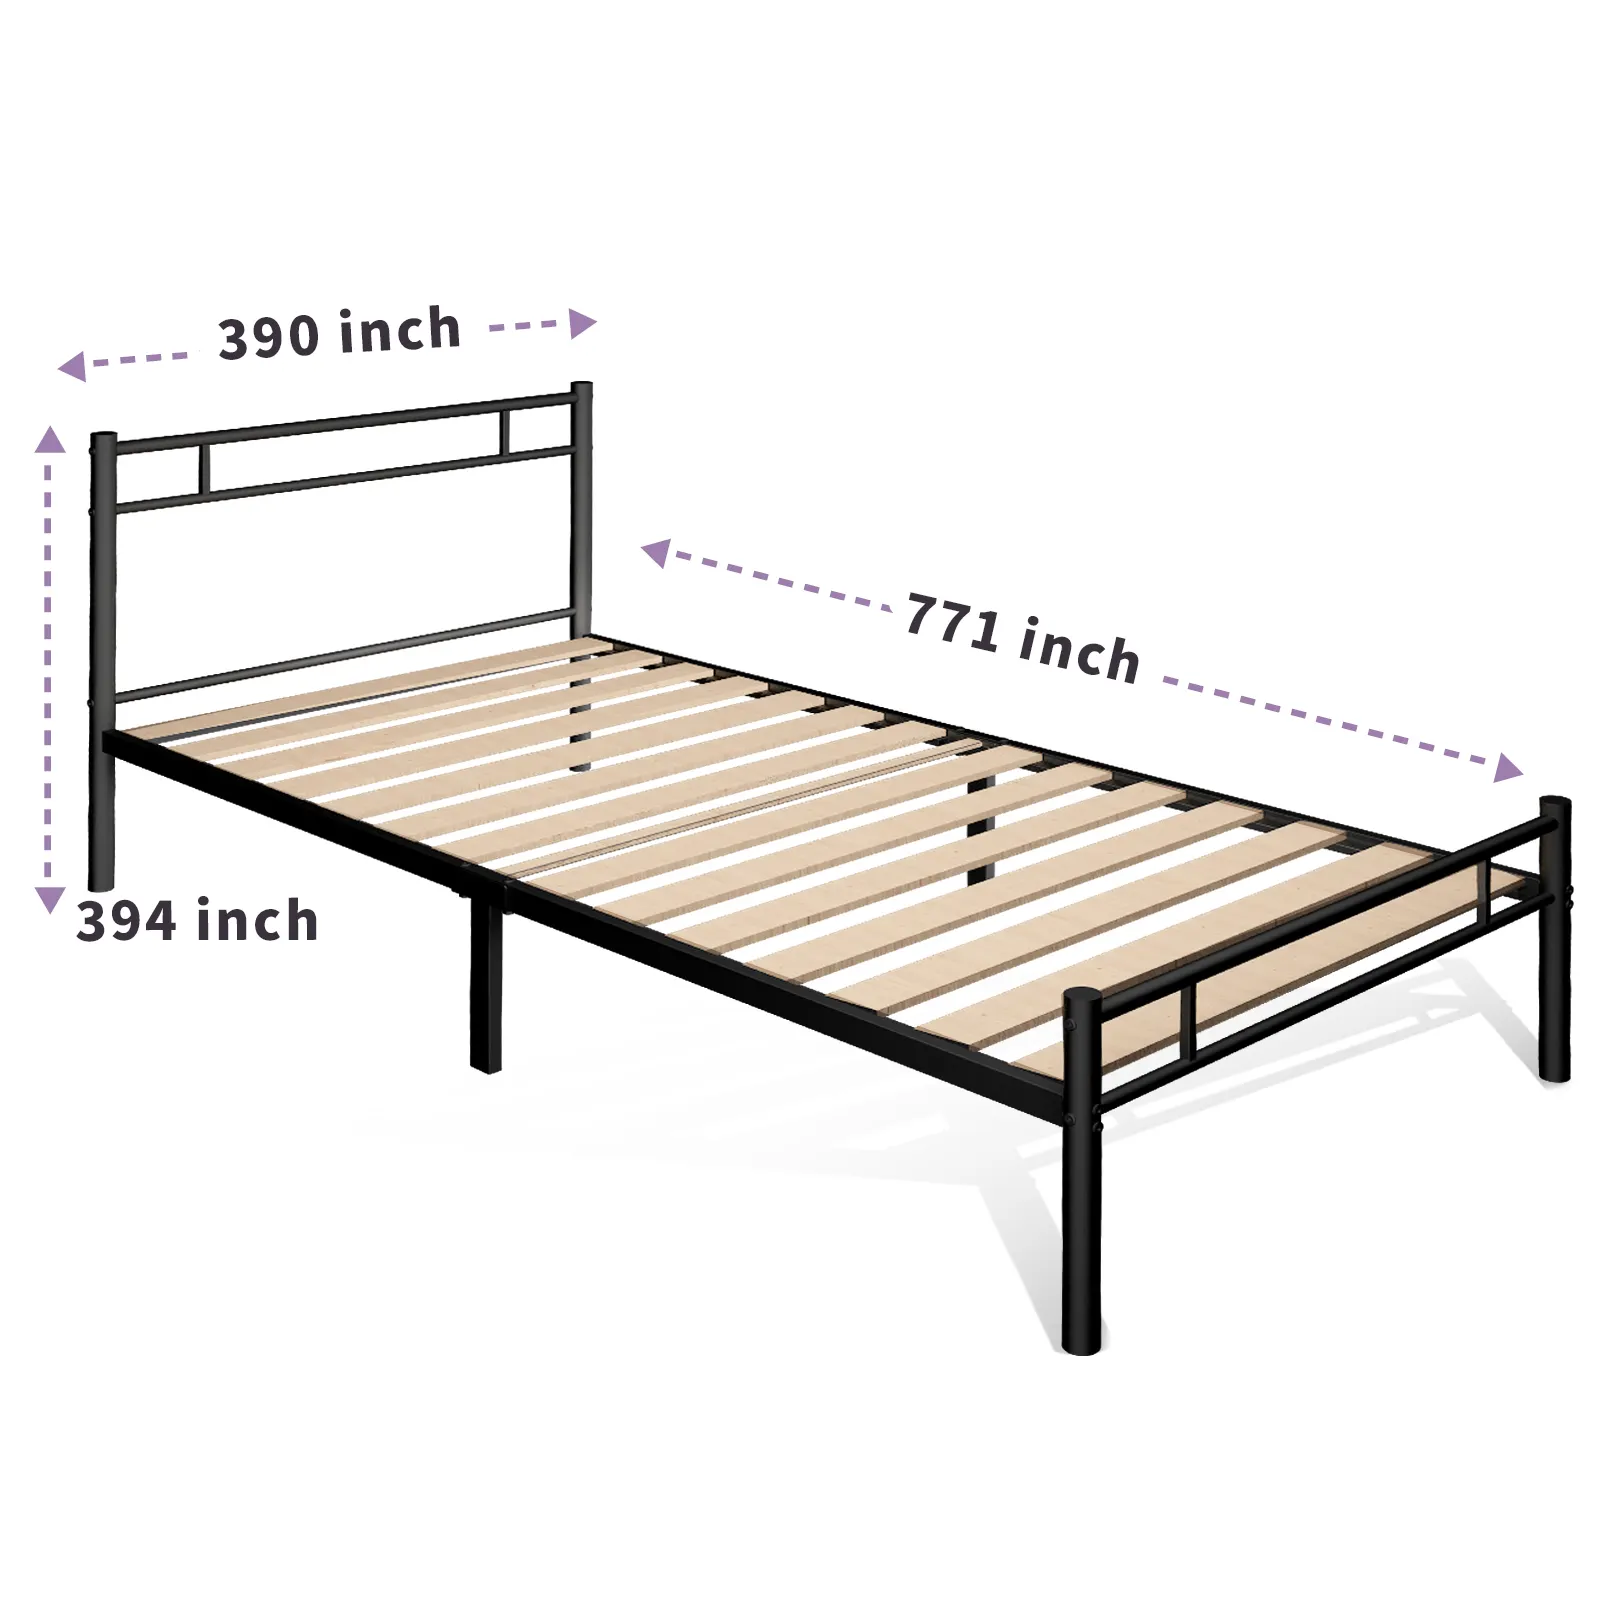 Kainice Cheap hotel sofa bed for twin size morden iron bed teenagers single bed frame for bedroom